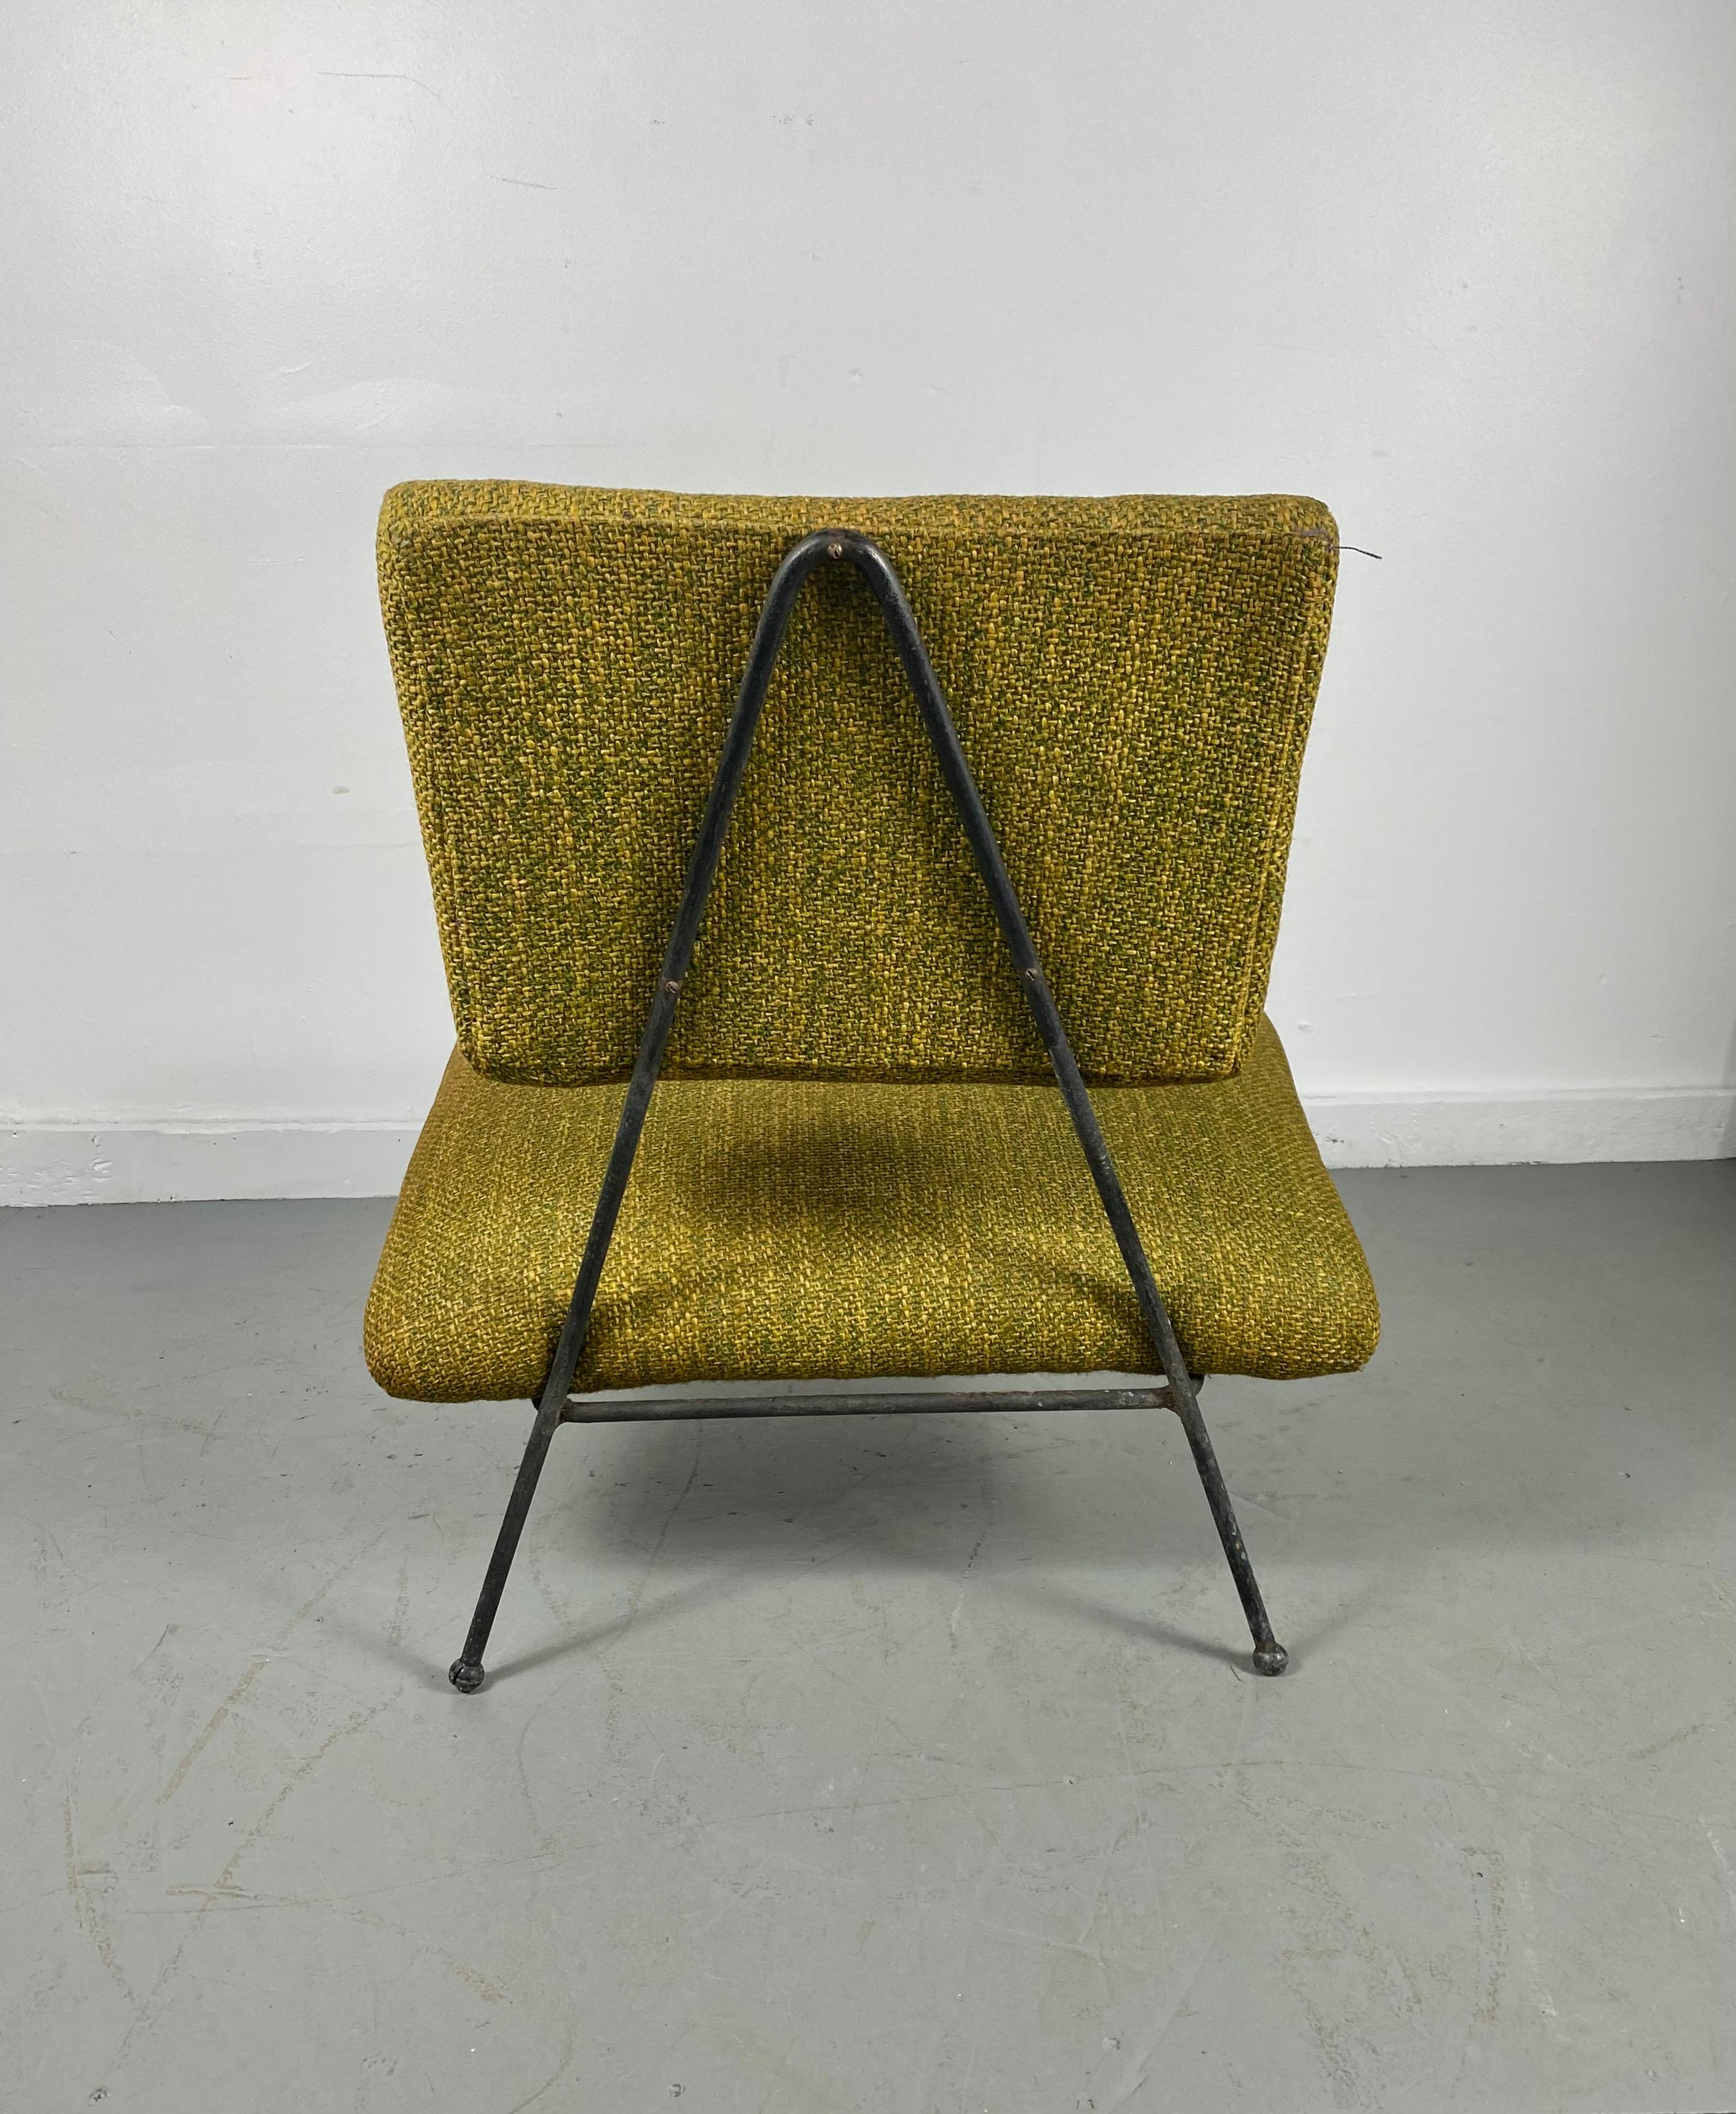 Extremely rare modernist iron Adrian Pearsall for Craft Associates arm-less lounge chair, amazing design. Classic Mid-Century Modern. Black iron frame, ball feet, retains original mid century moss green wool fabric, also retains original Craft